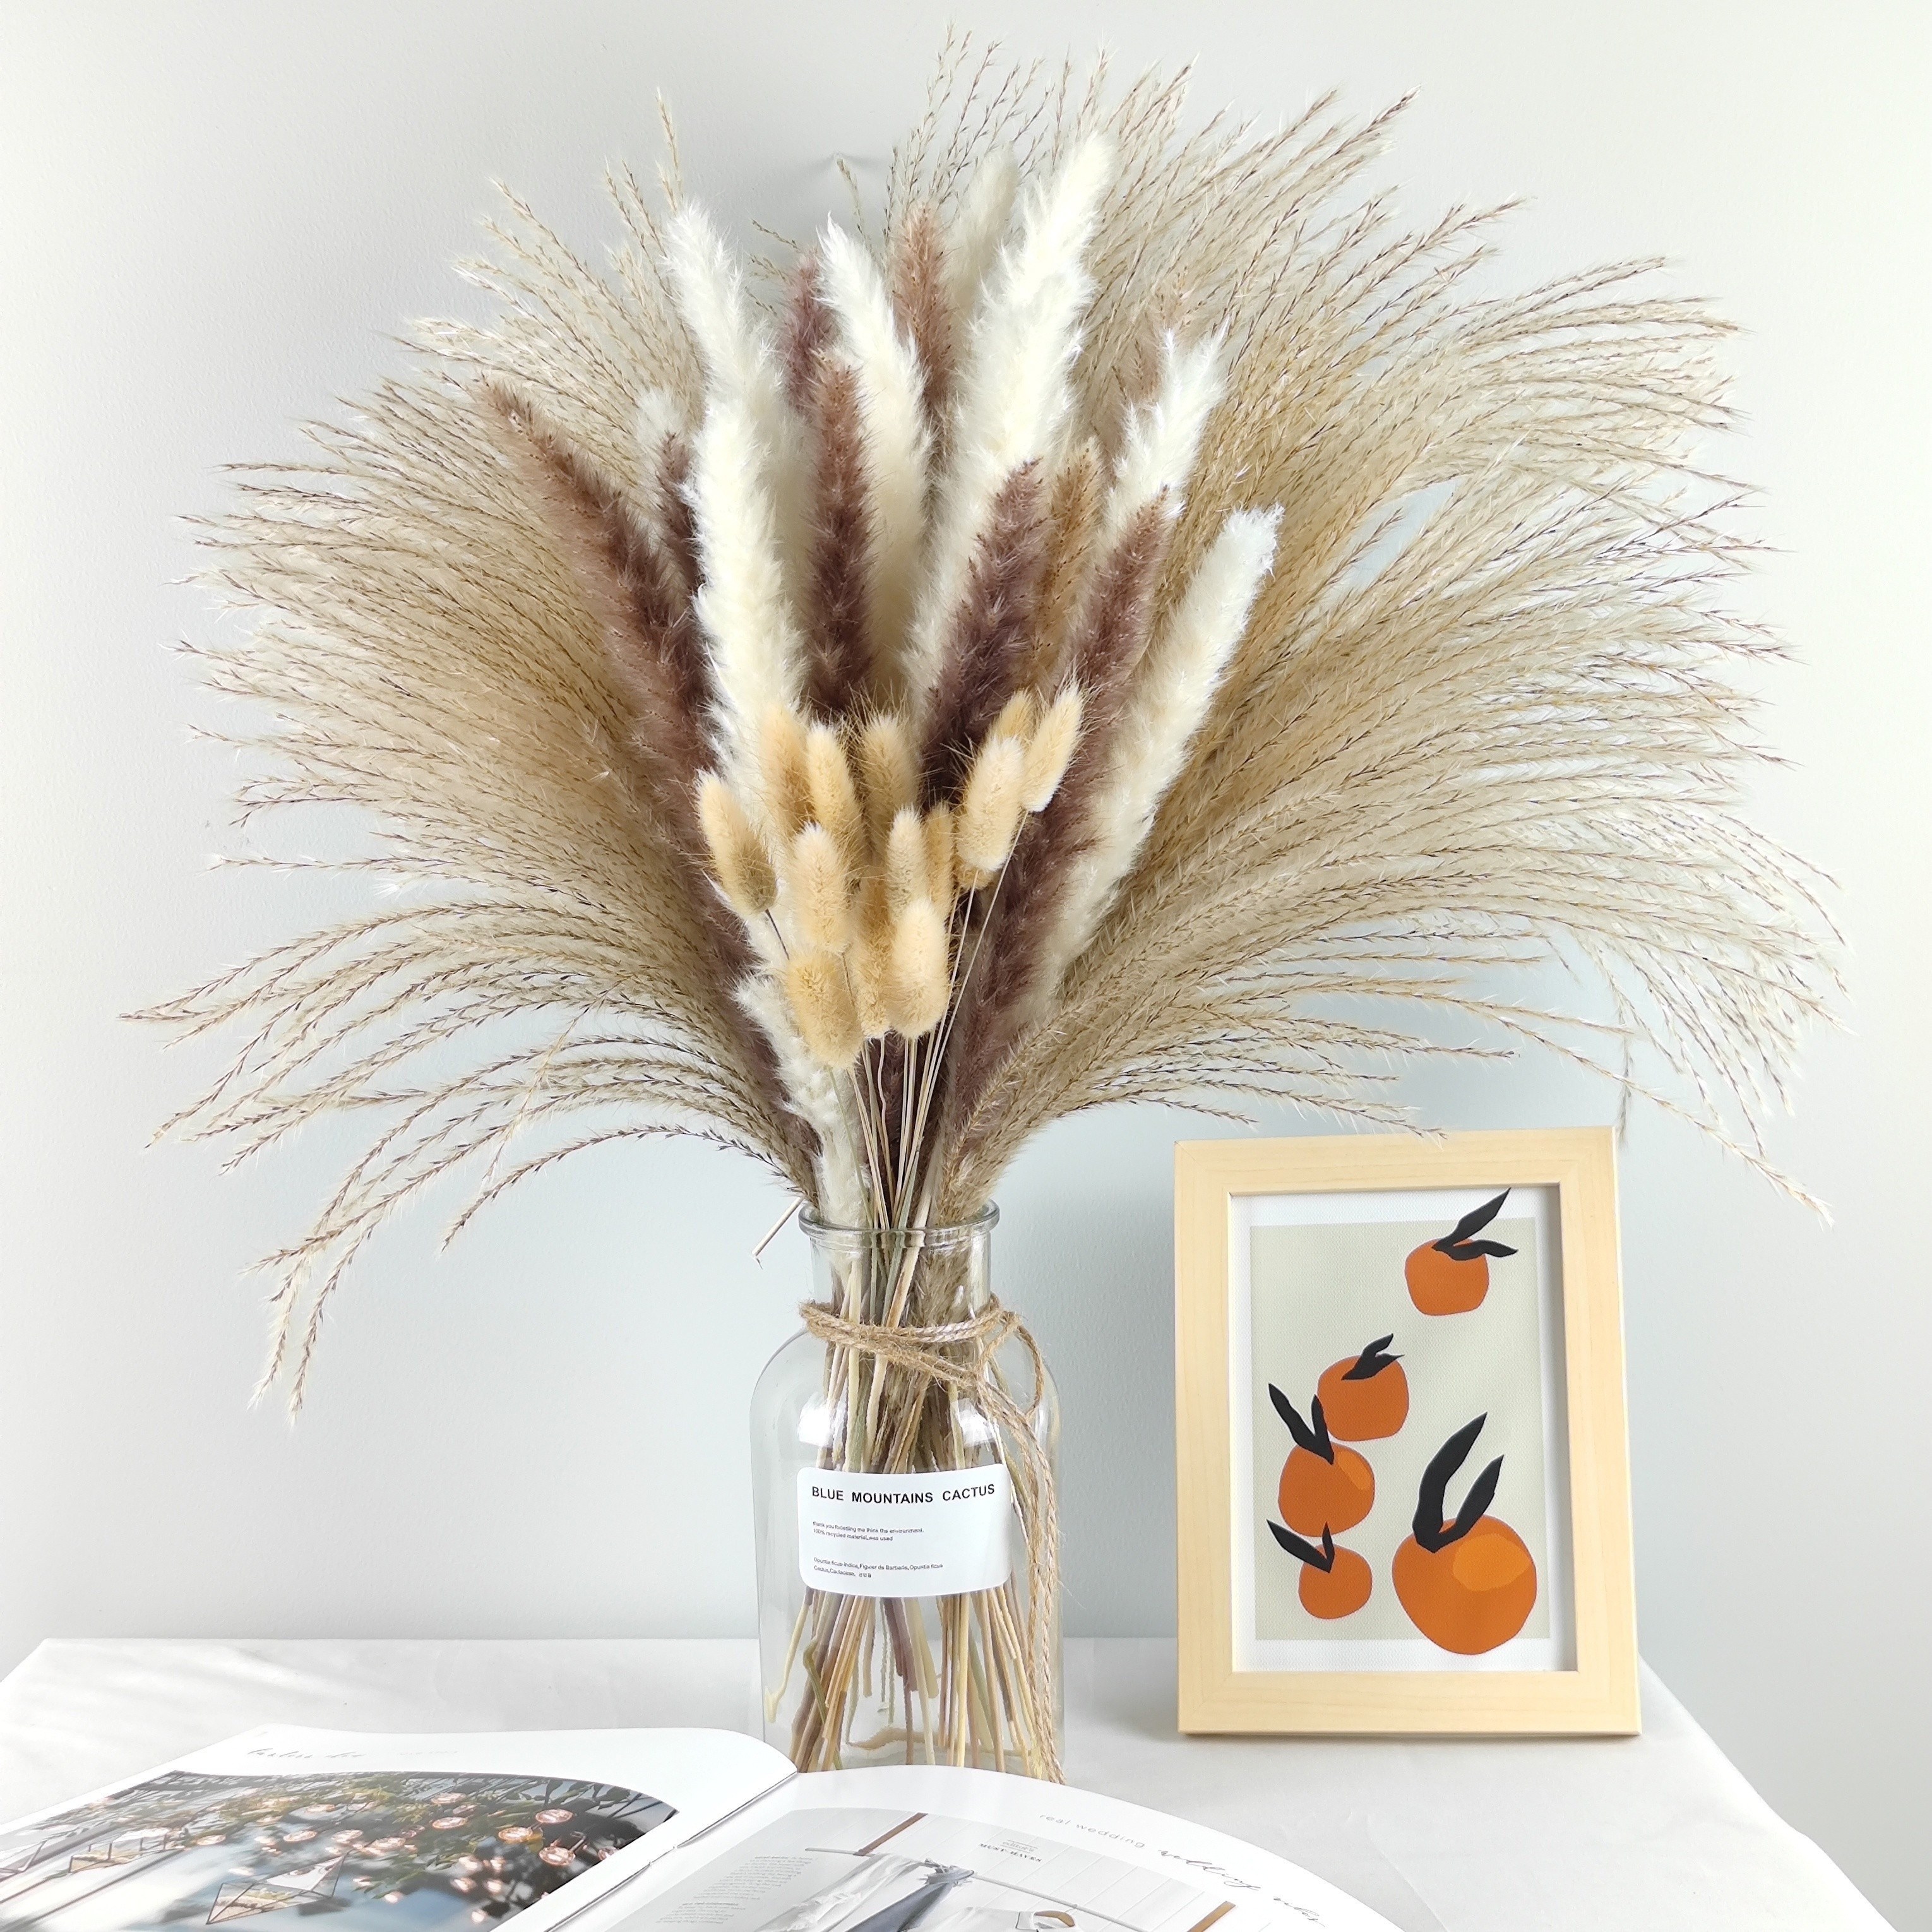 

80pcs Dried Pampas Grass Decor, Pampas Grass Contains Bunny Tails Dried Flowers, Reed Grass Bouquet For Wedding Boho Flowers Home Table Decor, Rustic Farmhouse Party (white And Brown) Art Supplies